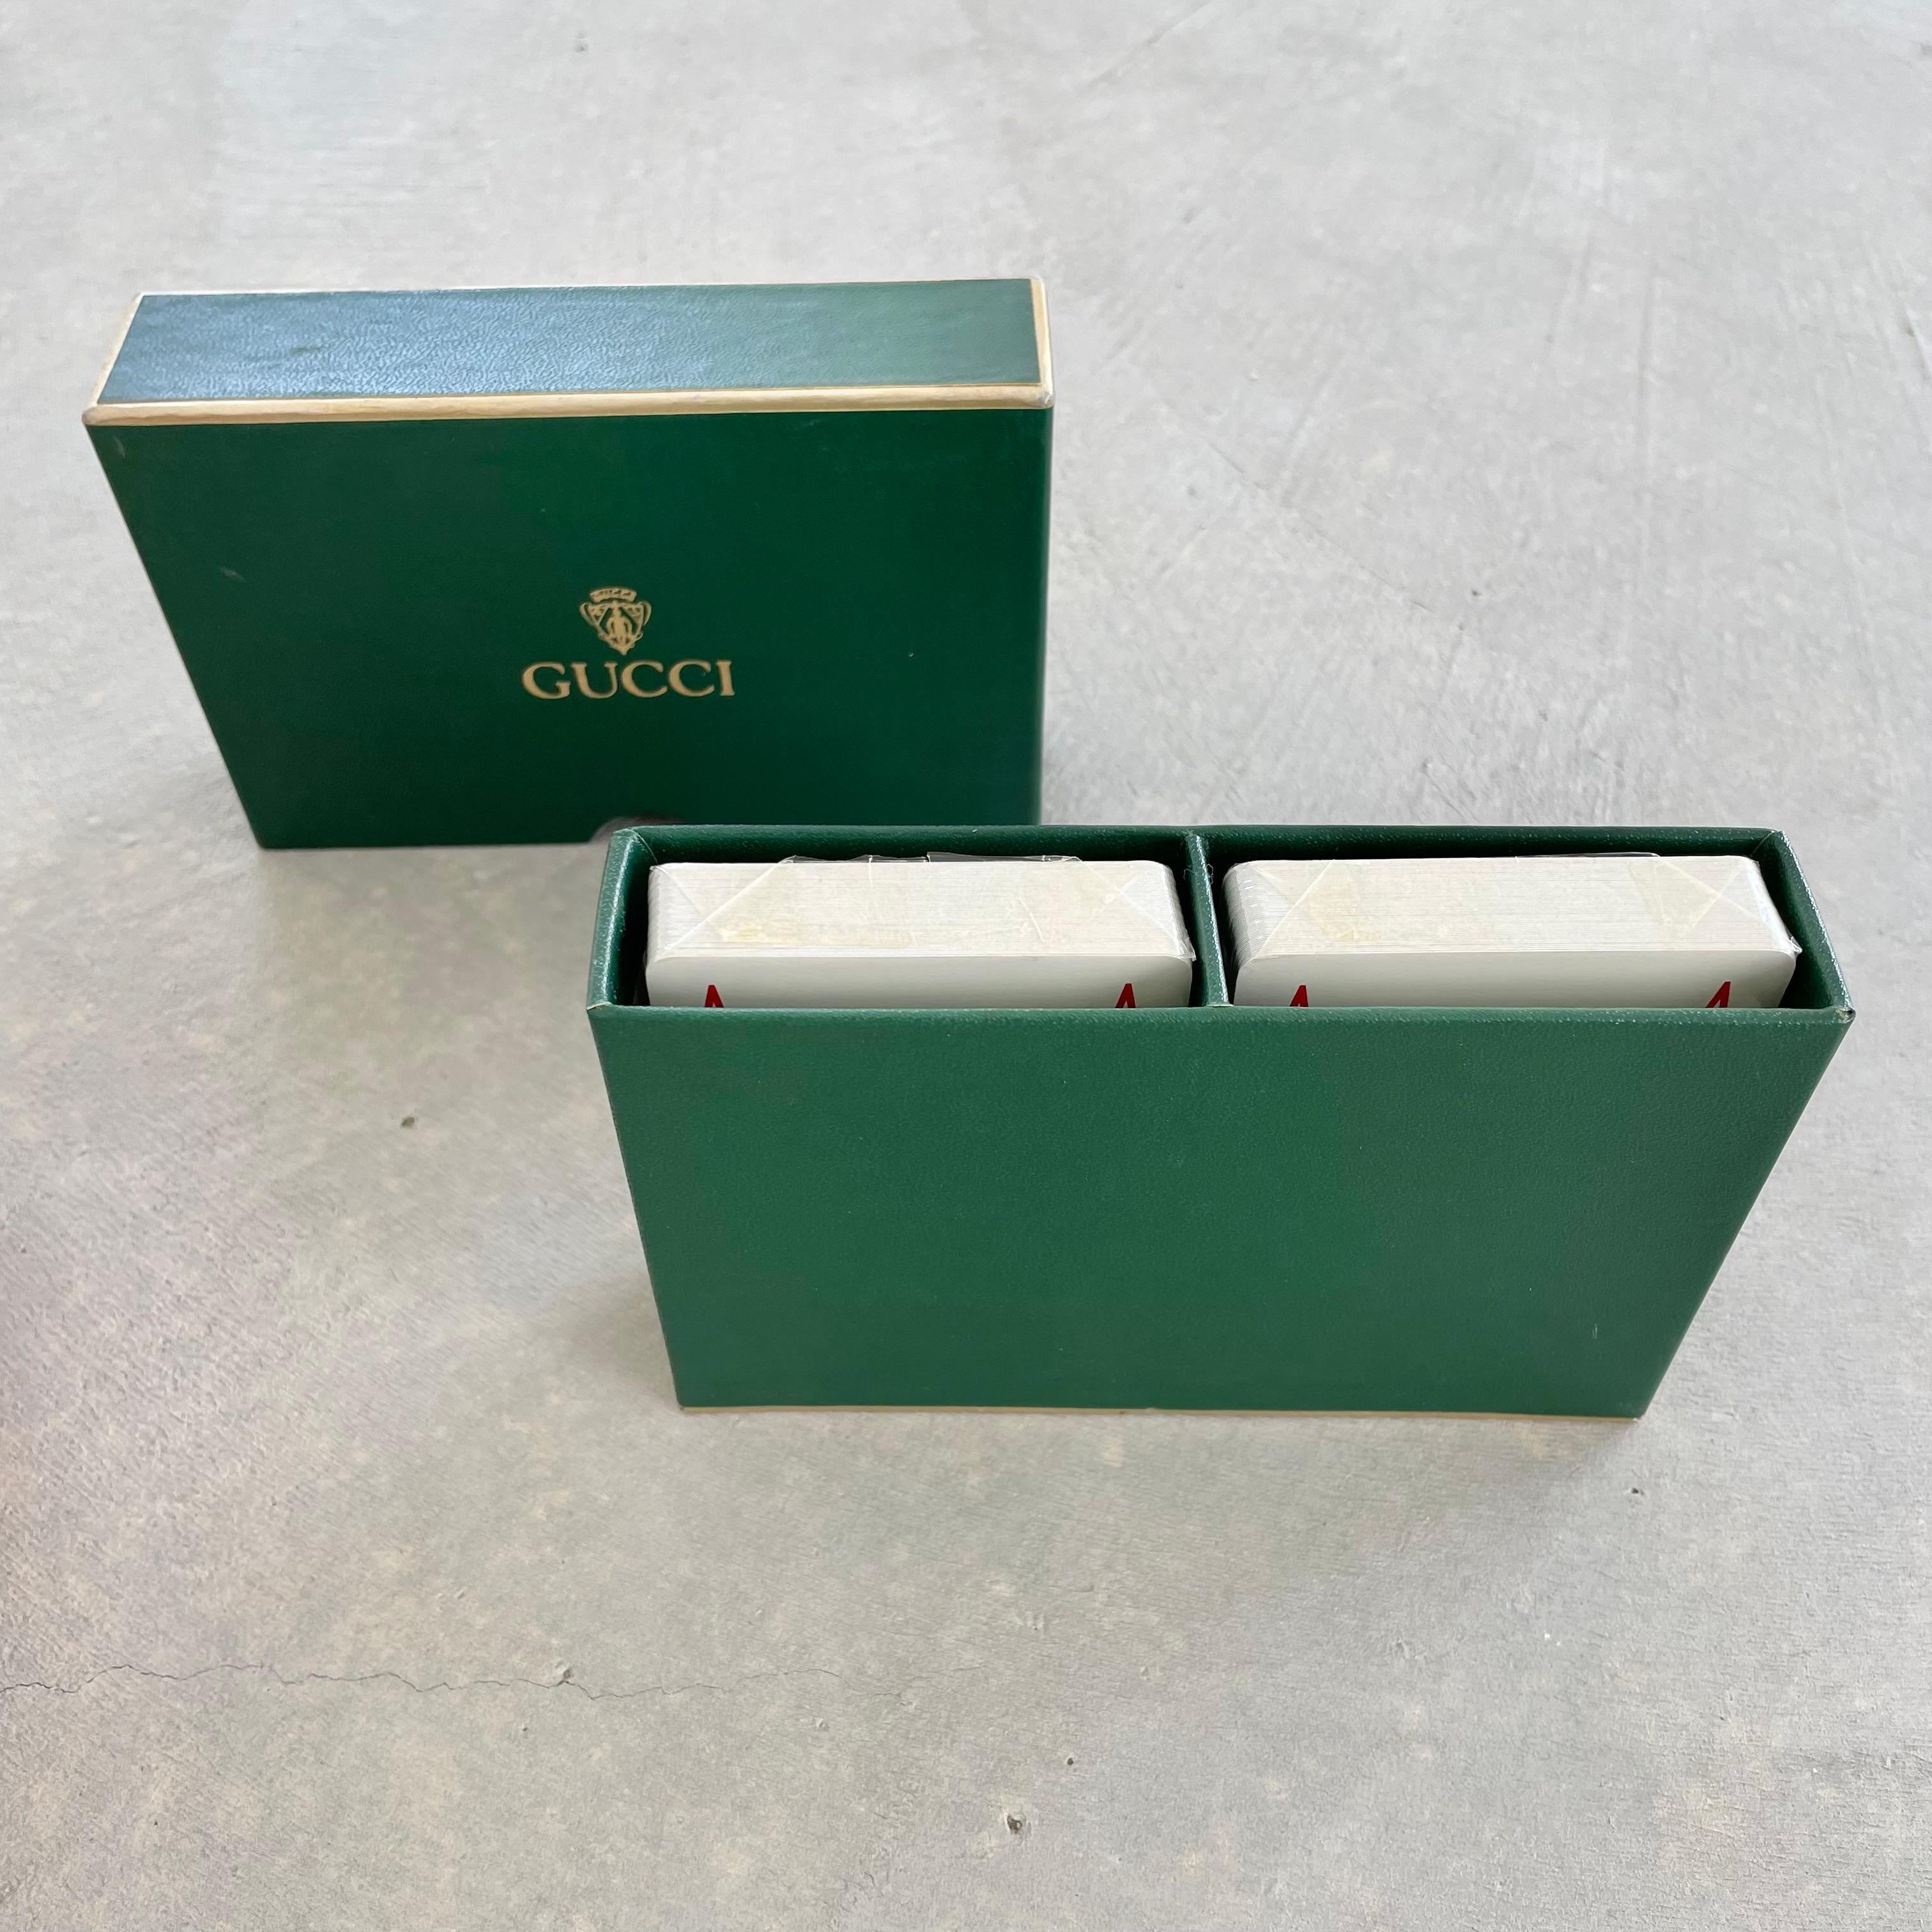 Plastic Vintage Gucci Playing Cards